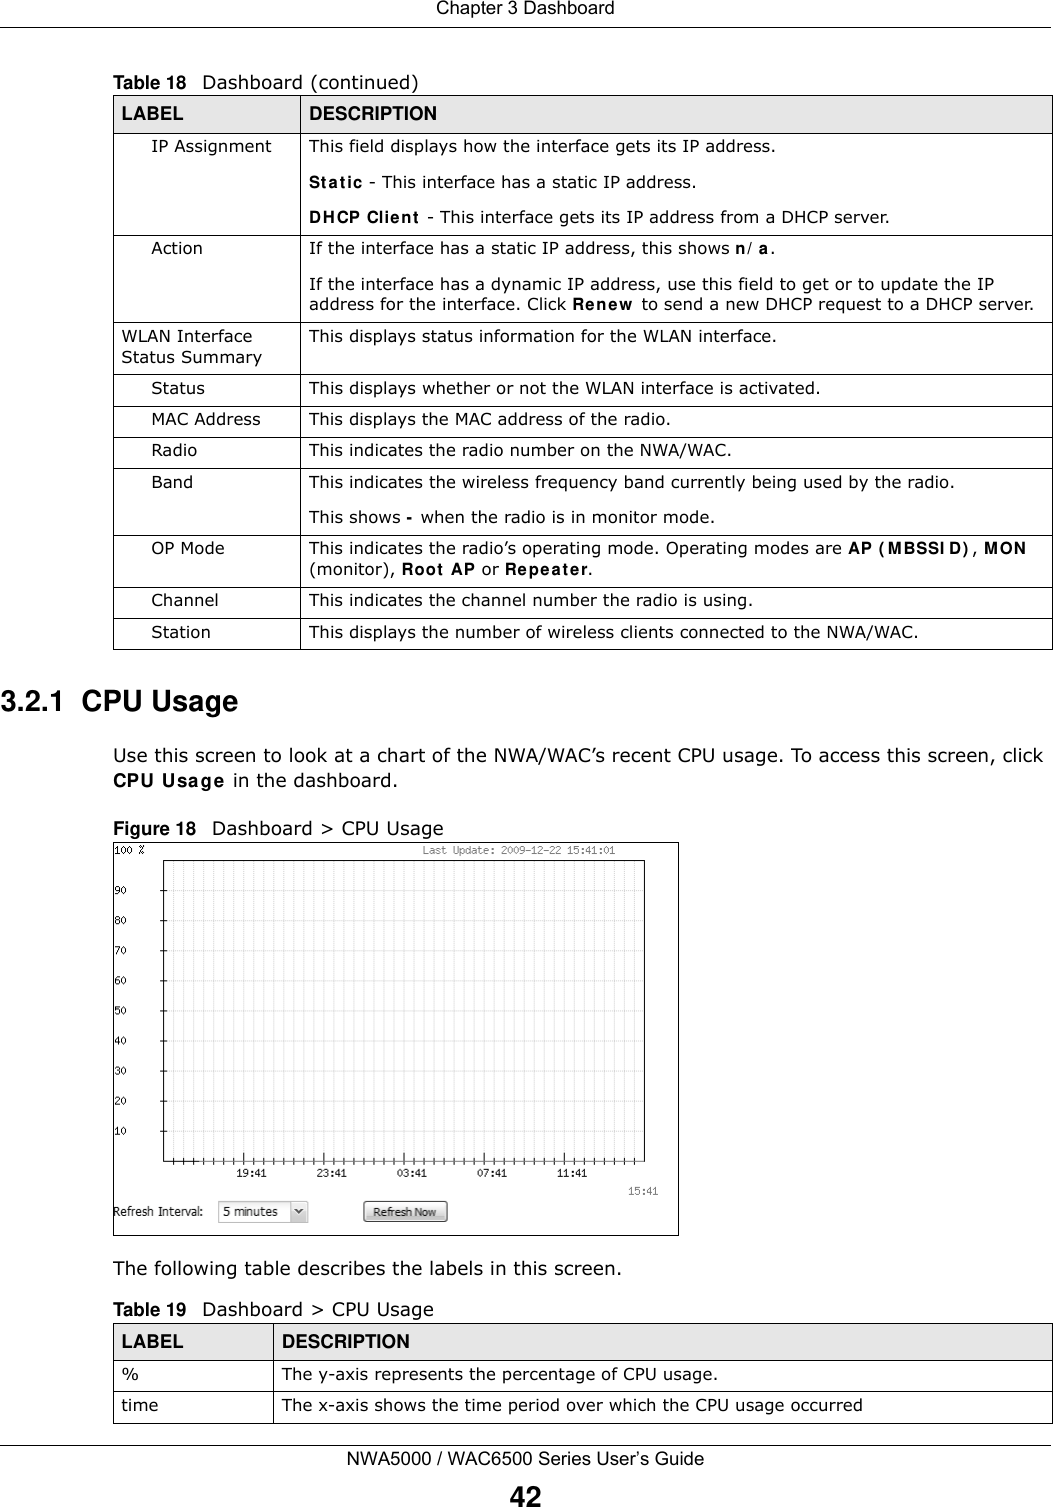 Chapter 3 DashboardNWA5000 / WAC6500 Series User’s Guide423.2.1  CPU UsageUse this screen to look at a chart of the NWA/WAC’s recent CPU usage. To access this screen, click CPU Usa ge in the dashboard.Figure 18   Dashboard &gt; CPU UsageThe following table describes the labels in this screen.  IP Assignment This field displays how the interface gets its IP address.St a t ic - This interface has a static IP address.DHCP Clie n t  - This interface gets its IP address from a DHCP server.Action If the interface has a static IP address, this shows n/ a. If the interface has a dynamic IP address, use this field to get or to update the IP address for the interface. Click Renew  to send a new DHCP request to a DHCP server. WLAN Interface Status SummaryThis displays status information for the WLAN interface.Status This displays whether or not the WLAN interface is activated.MAC Address This displays the MAC address of the radio.Radio This indicates the radio number on the NWA/WAC.Band This indicates the wireless frequency band currently being used by the radio. This shows - when the radio is in monitor mode.OP Mode This indicates the radio’s operating mode. Operating modes are AP ( MBSSI D ) , M ON  (monitor), Root  AP or Re pea t er.Channel This indicates the channel number the radio is using.Station This displays the number of wireless clients connected to the NWA/WAC.Table 18   Dashboard (continued)LABEL DESCRIPTIONTable 19   Dashboard &gt; CPU UsageLABEL DESCRIPTION% The y-axis represents the percentage of CPU usage.time The x-axis shows the time period over which the CPU usage occurred